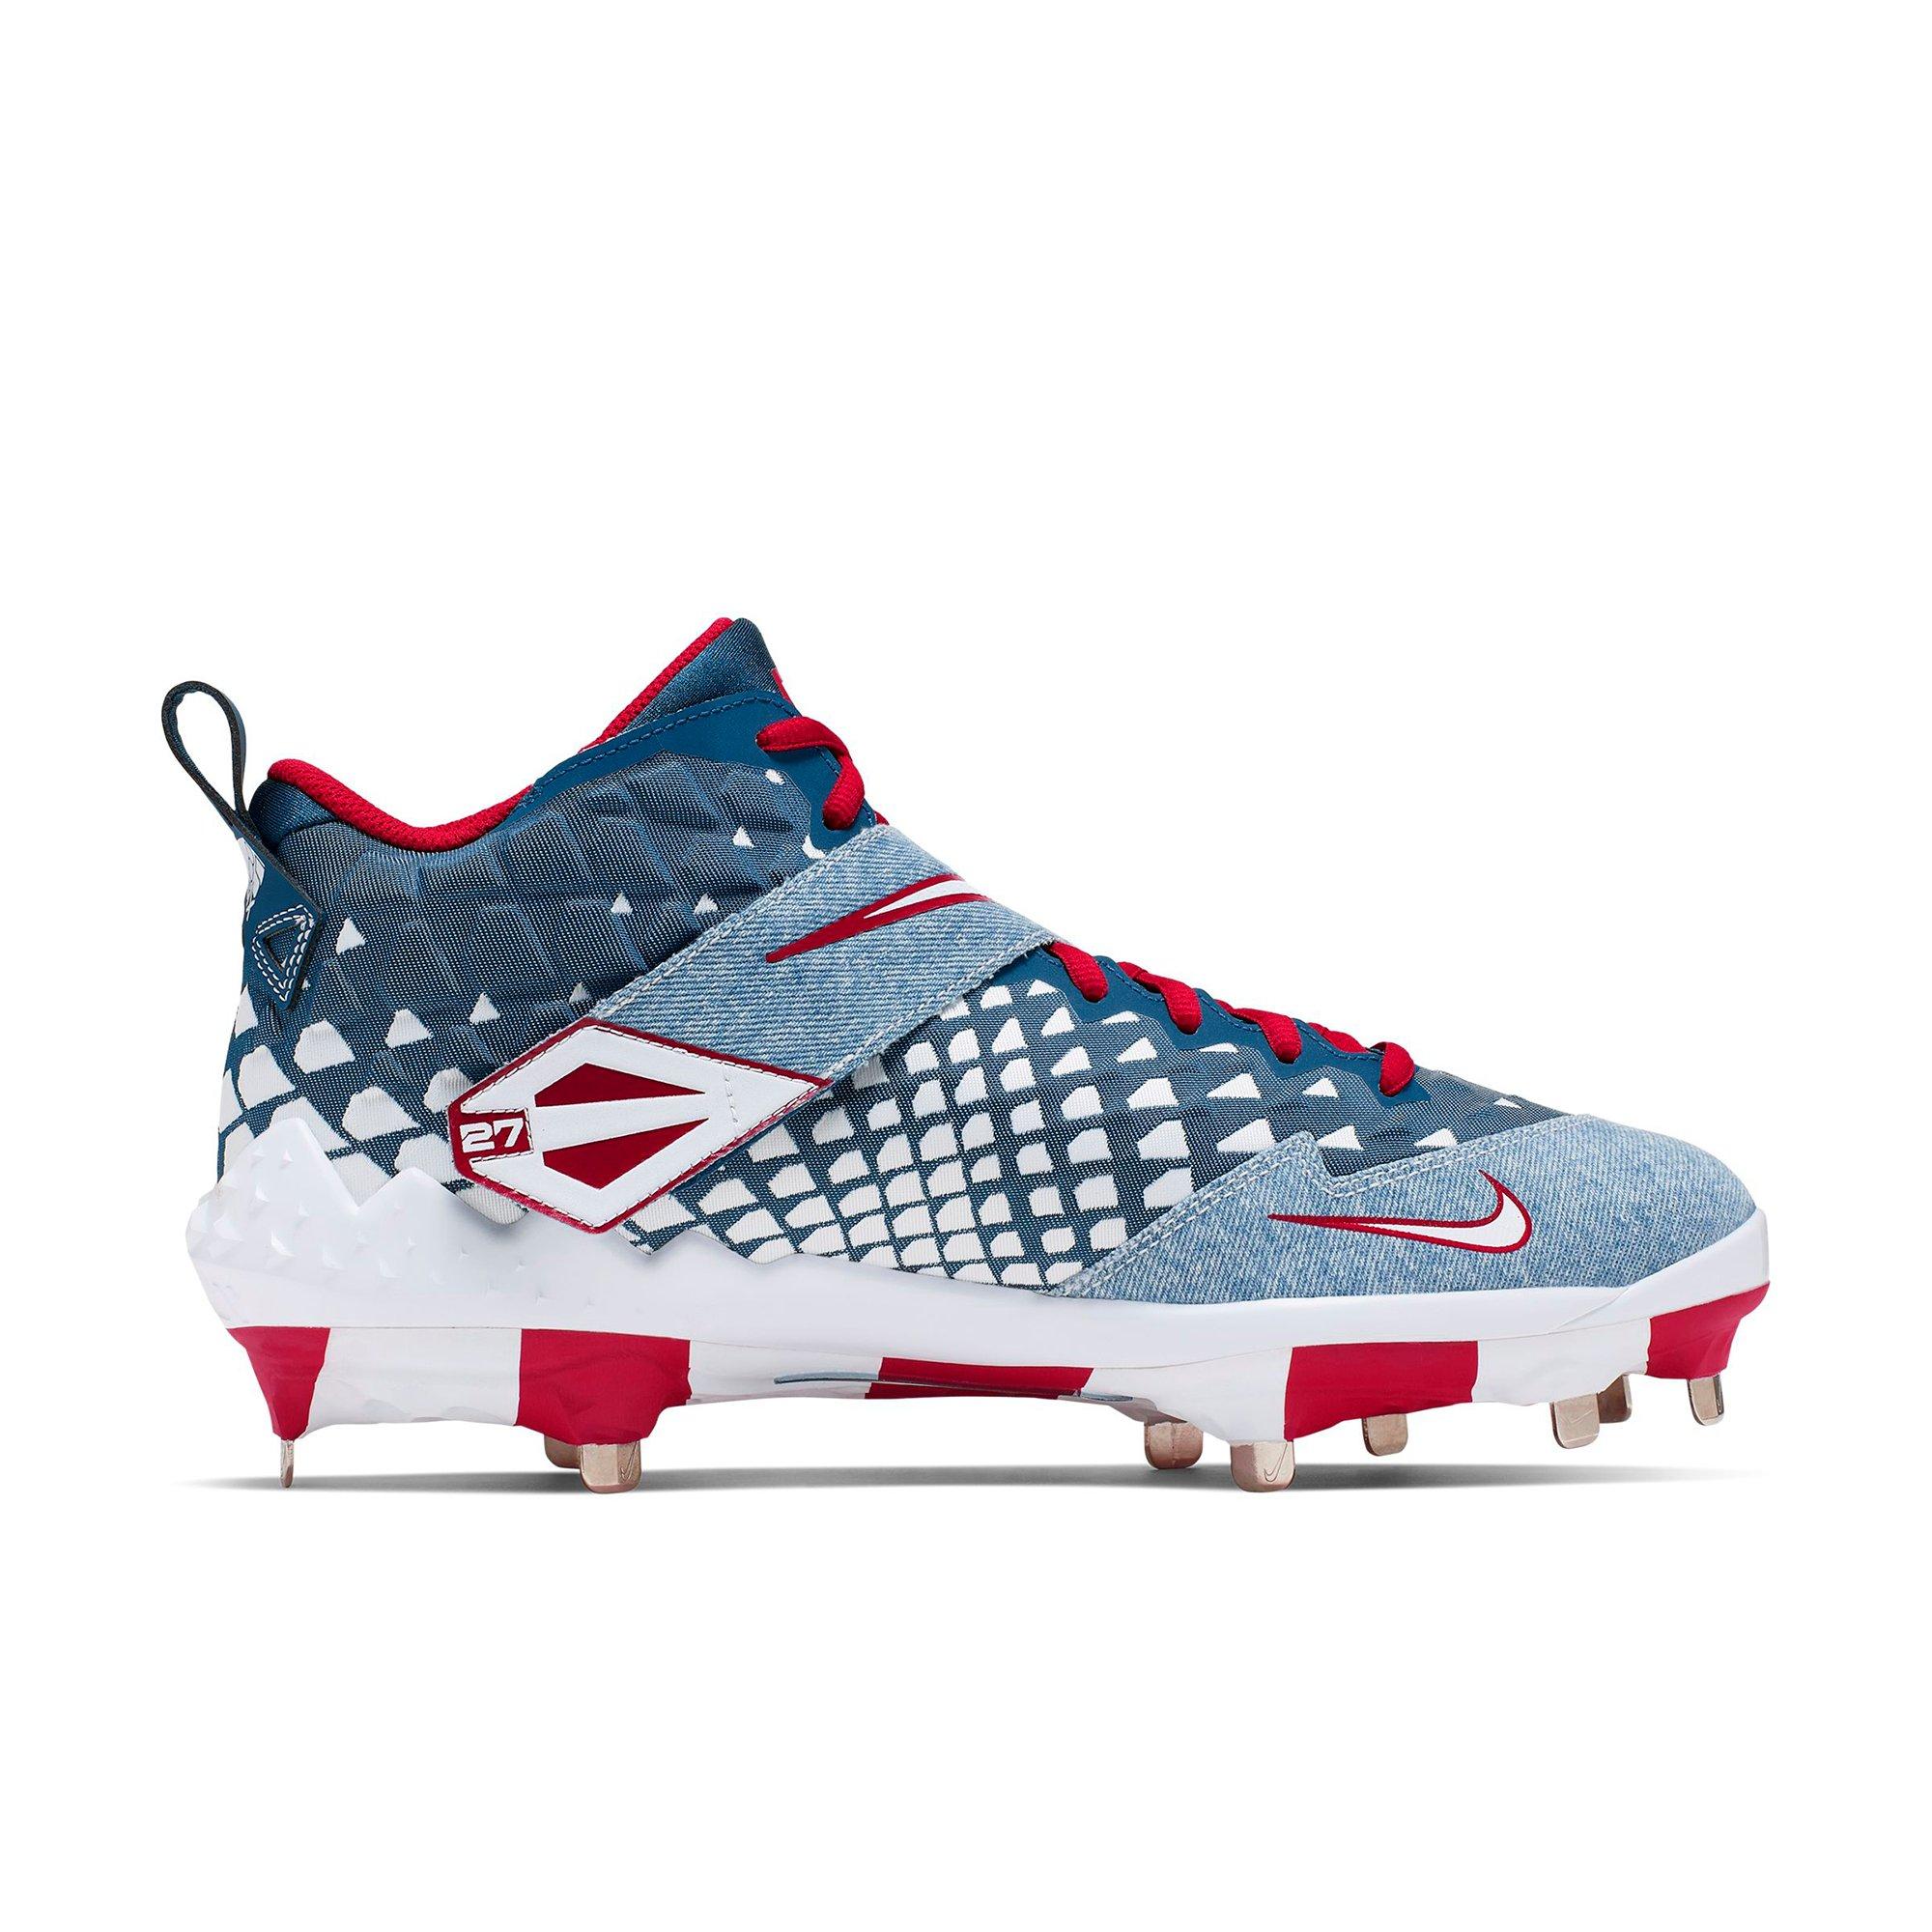 mike trout 6 baseball cleats